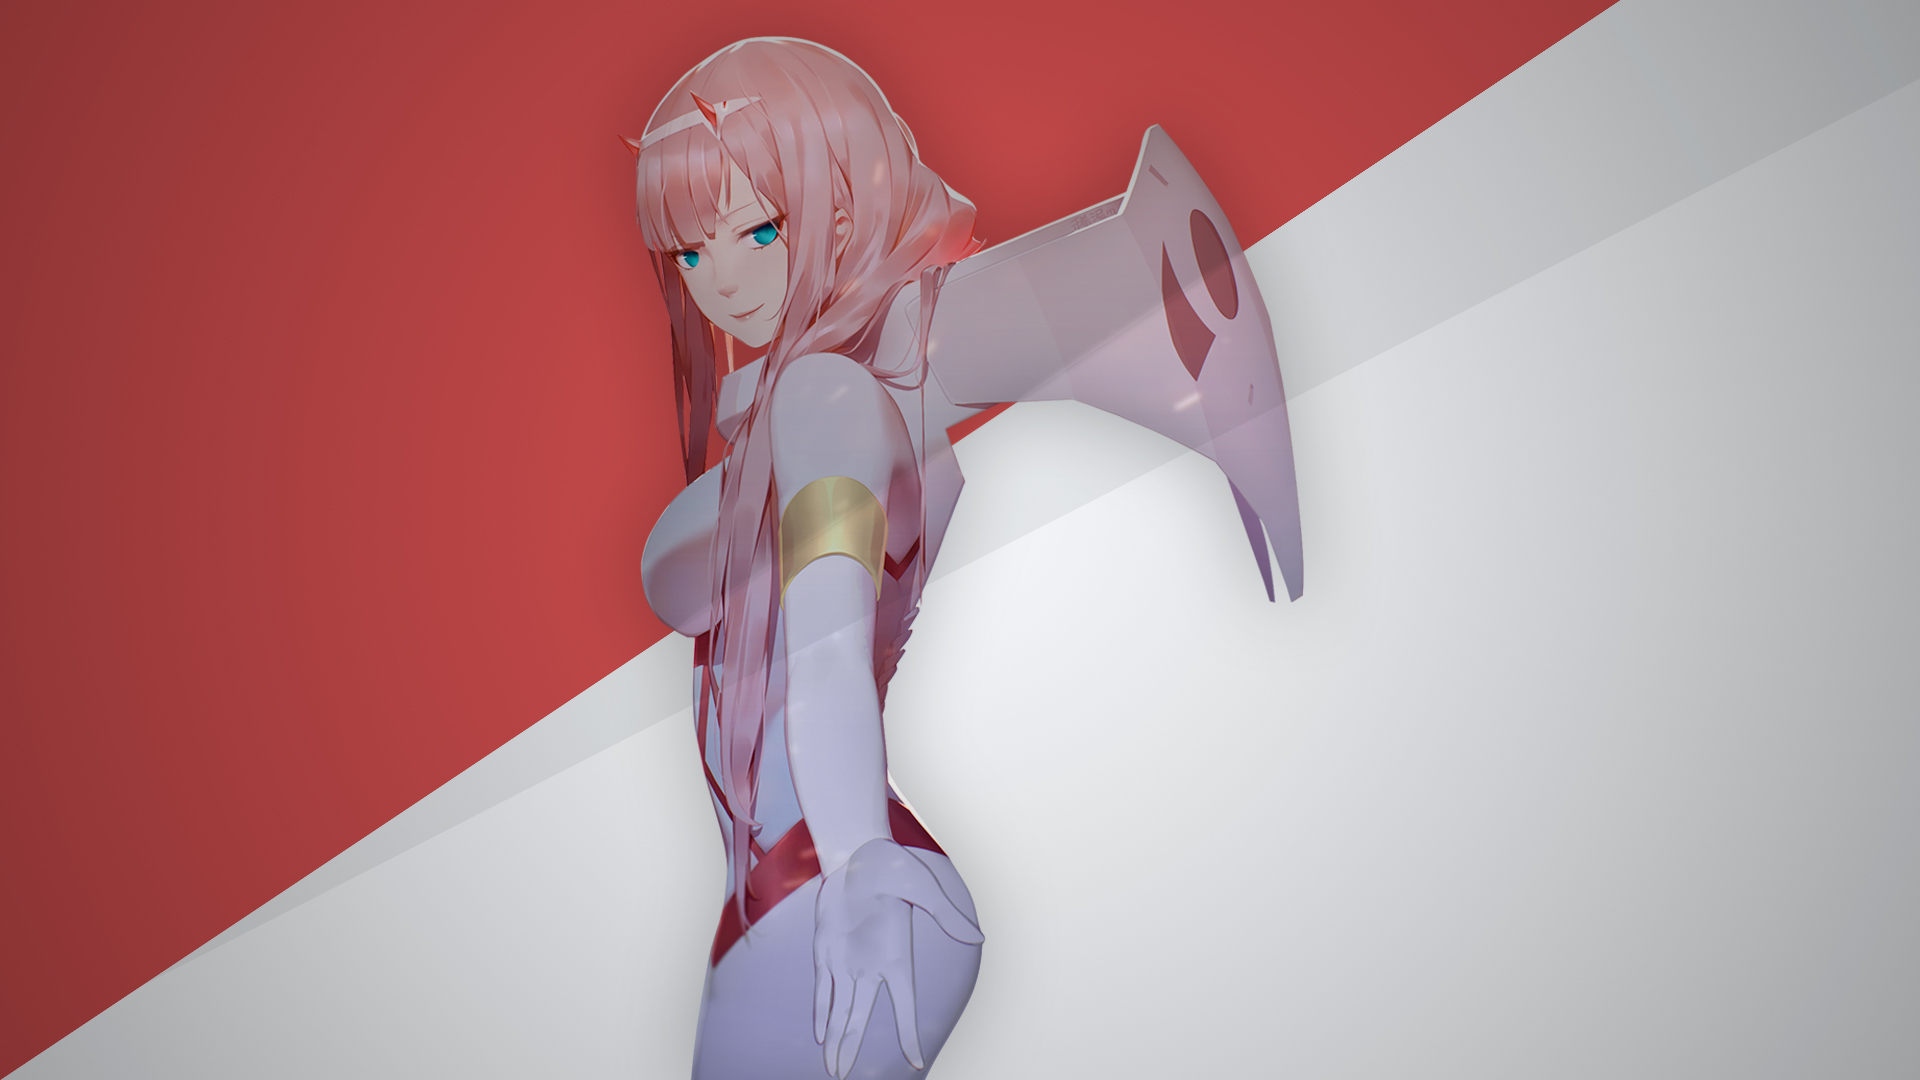 Anime 1920x1080 fan art anime anime girls Darling in the FranXX Zero Two (Darling in the FranXX) bodysuit cyberpunk futuristic science fiction women red background white background simple background sideboob boobs looking at viewer smiling